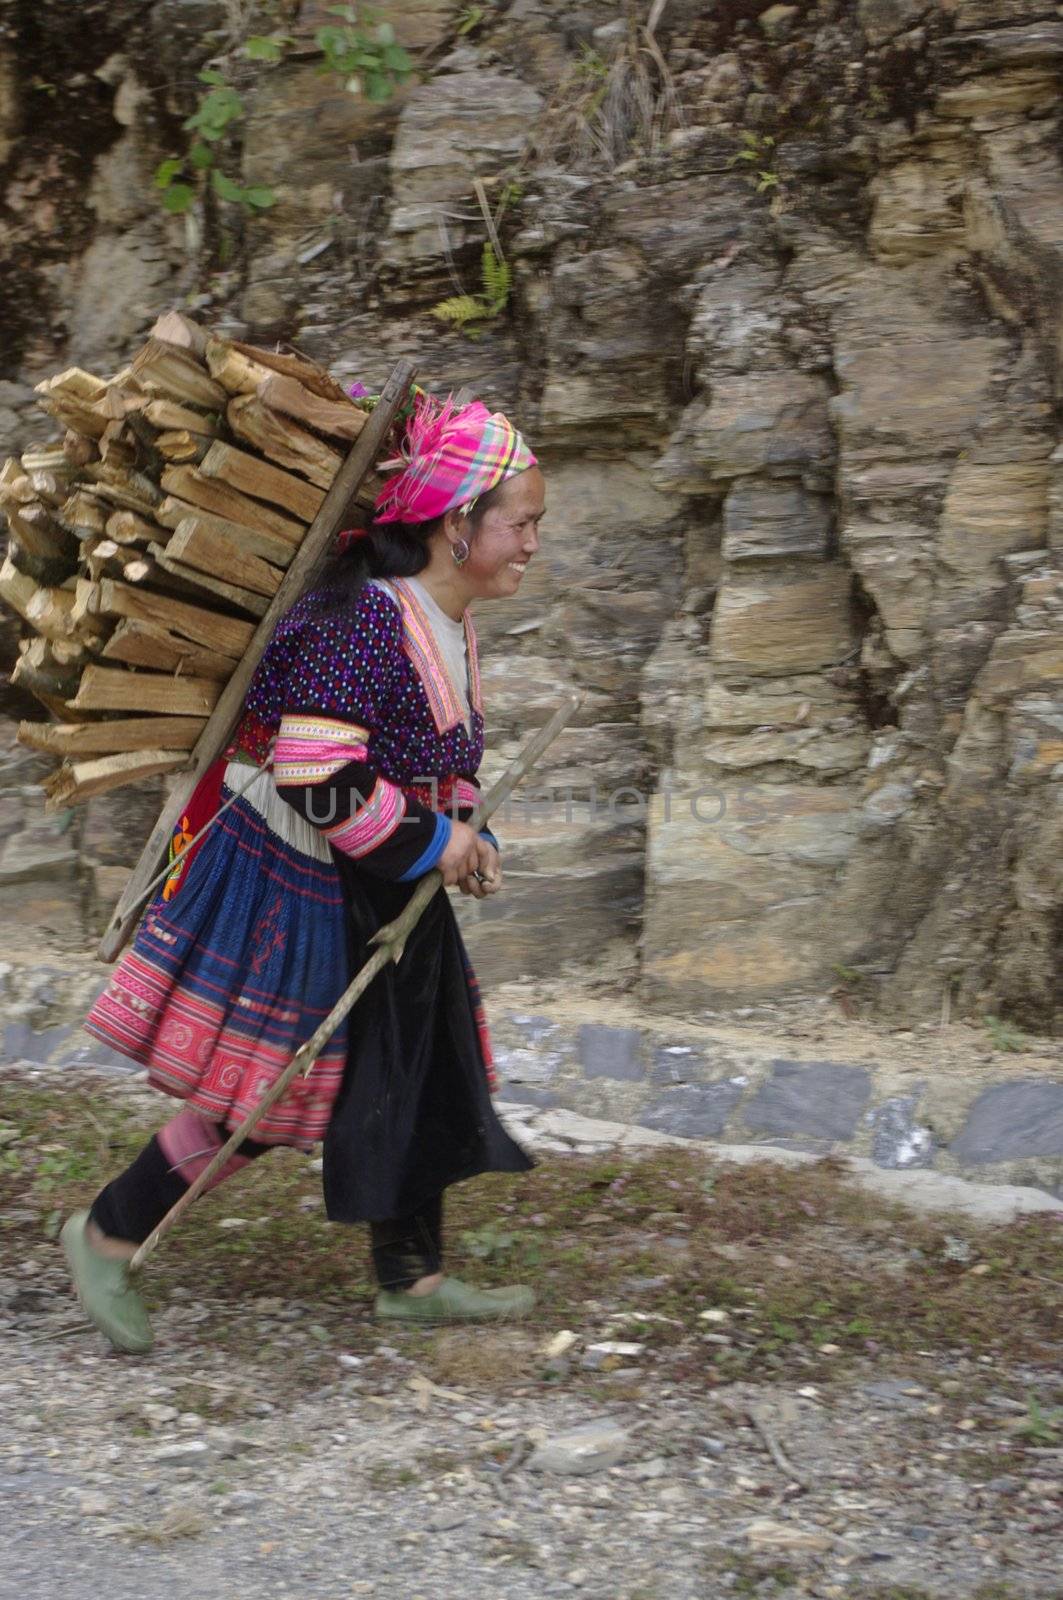 Hmong flowered woman returning from the firewood in the mountains. This woman is  able to carry heavy loads over steep trails of the mountain for wood supply in the kitchen